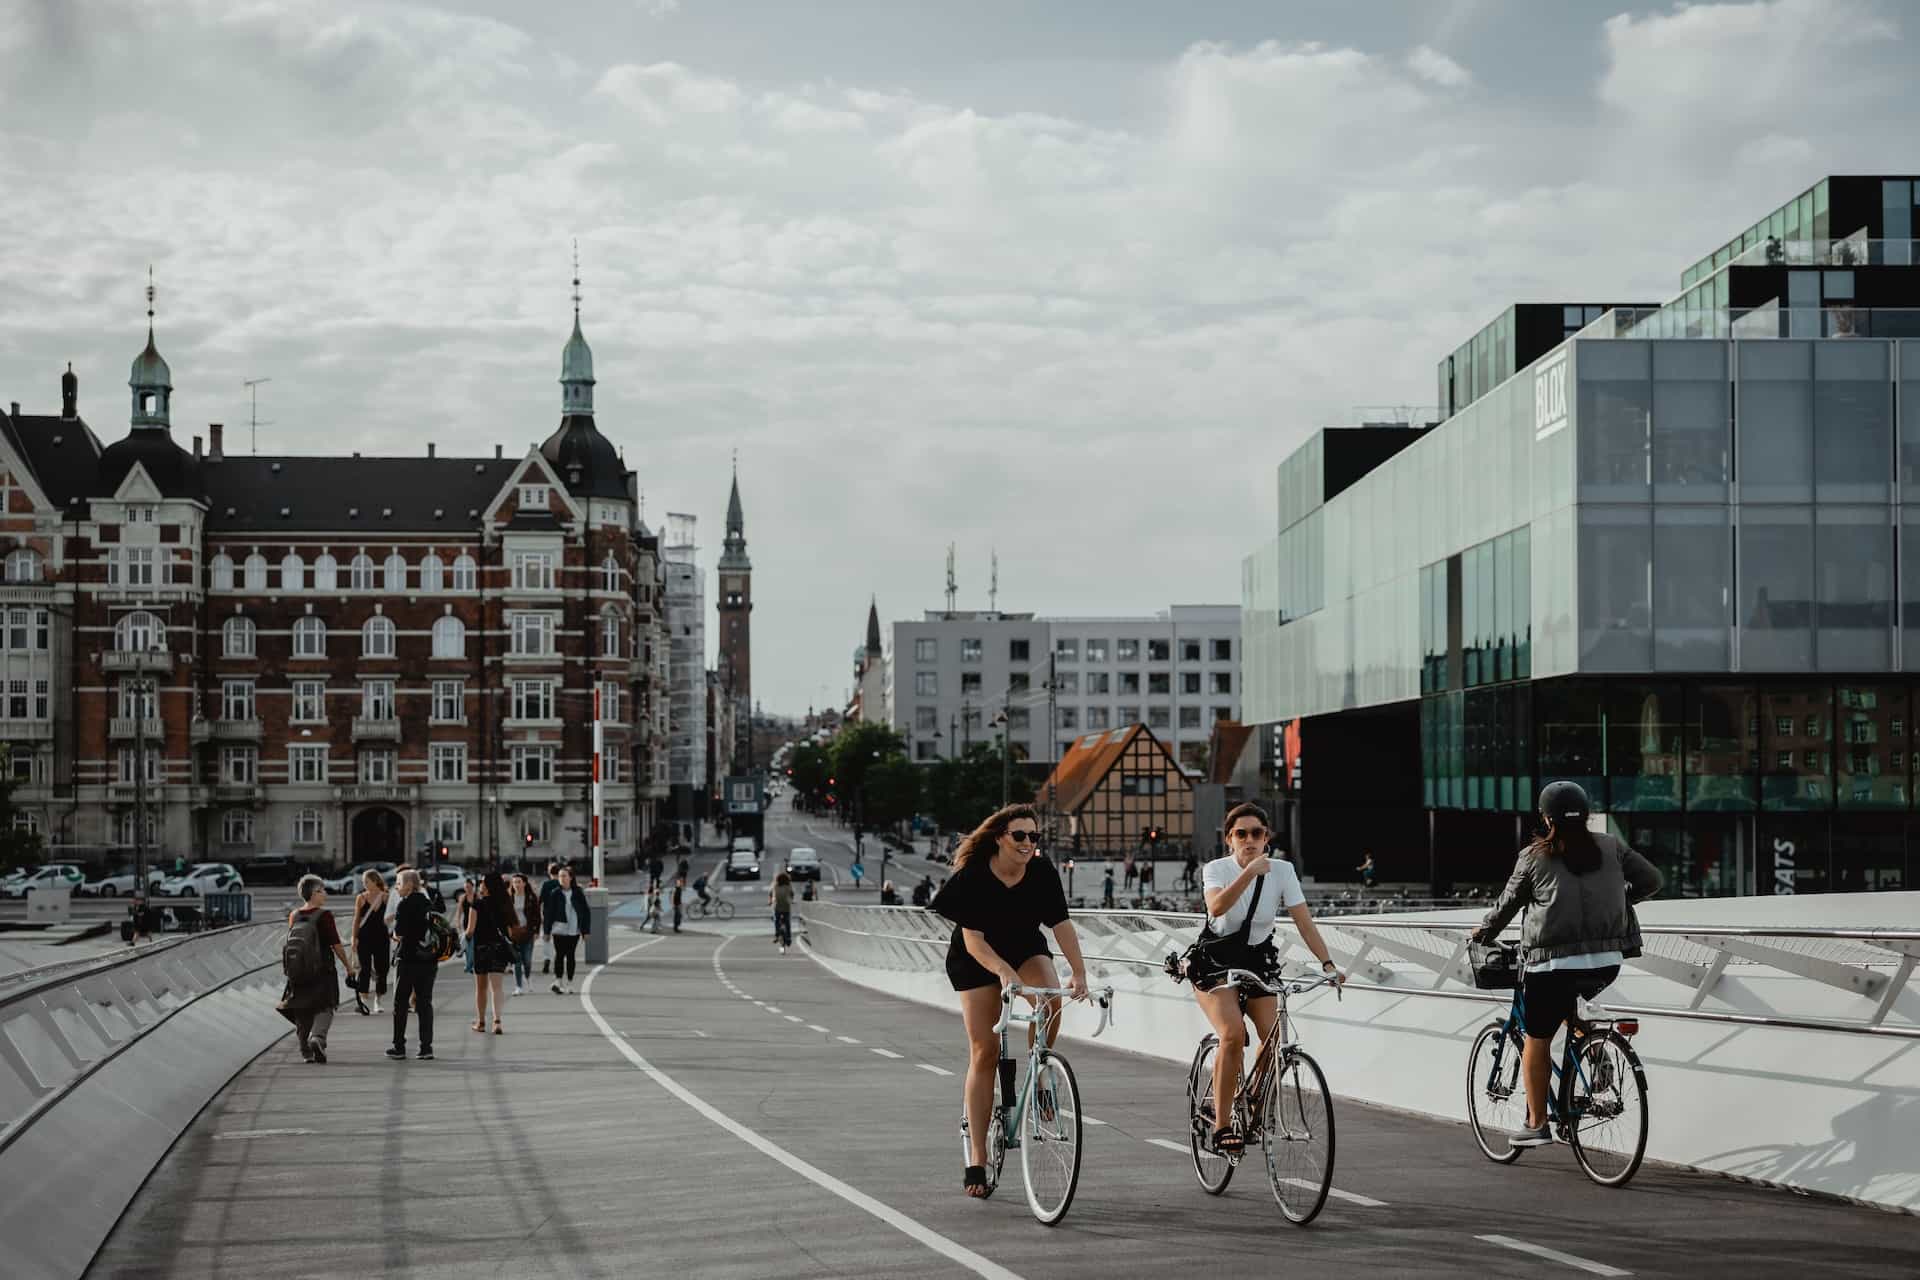 People cycling and walking on a path near buildings.